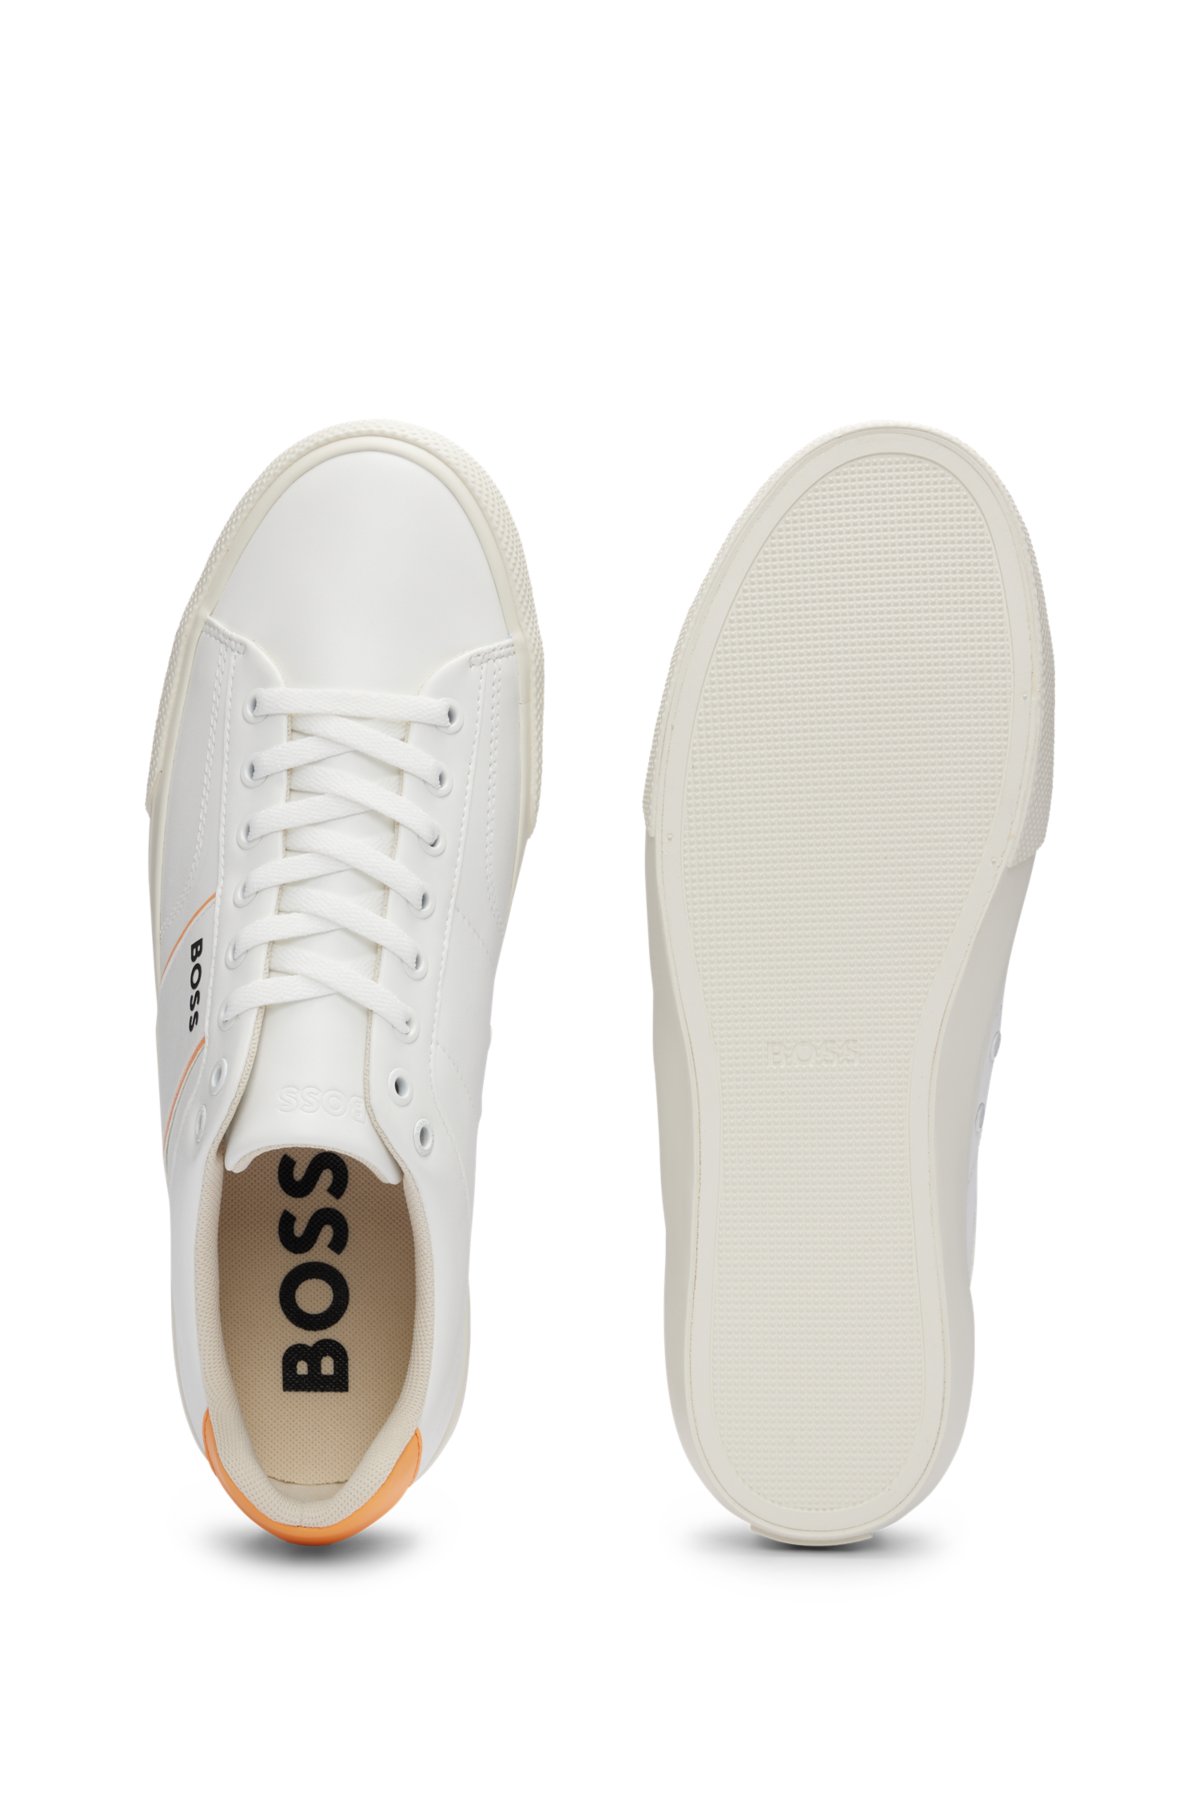 Cupsole lace-up trainers with contrast logo, White